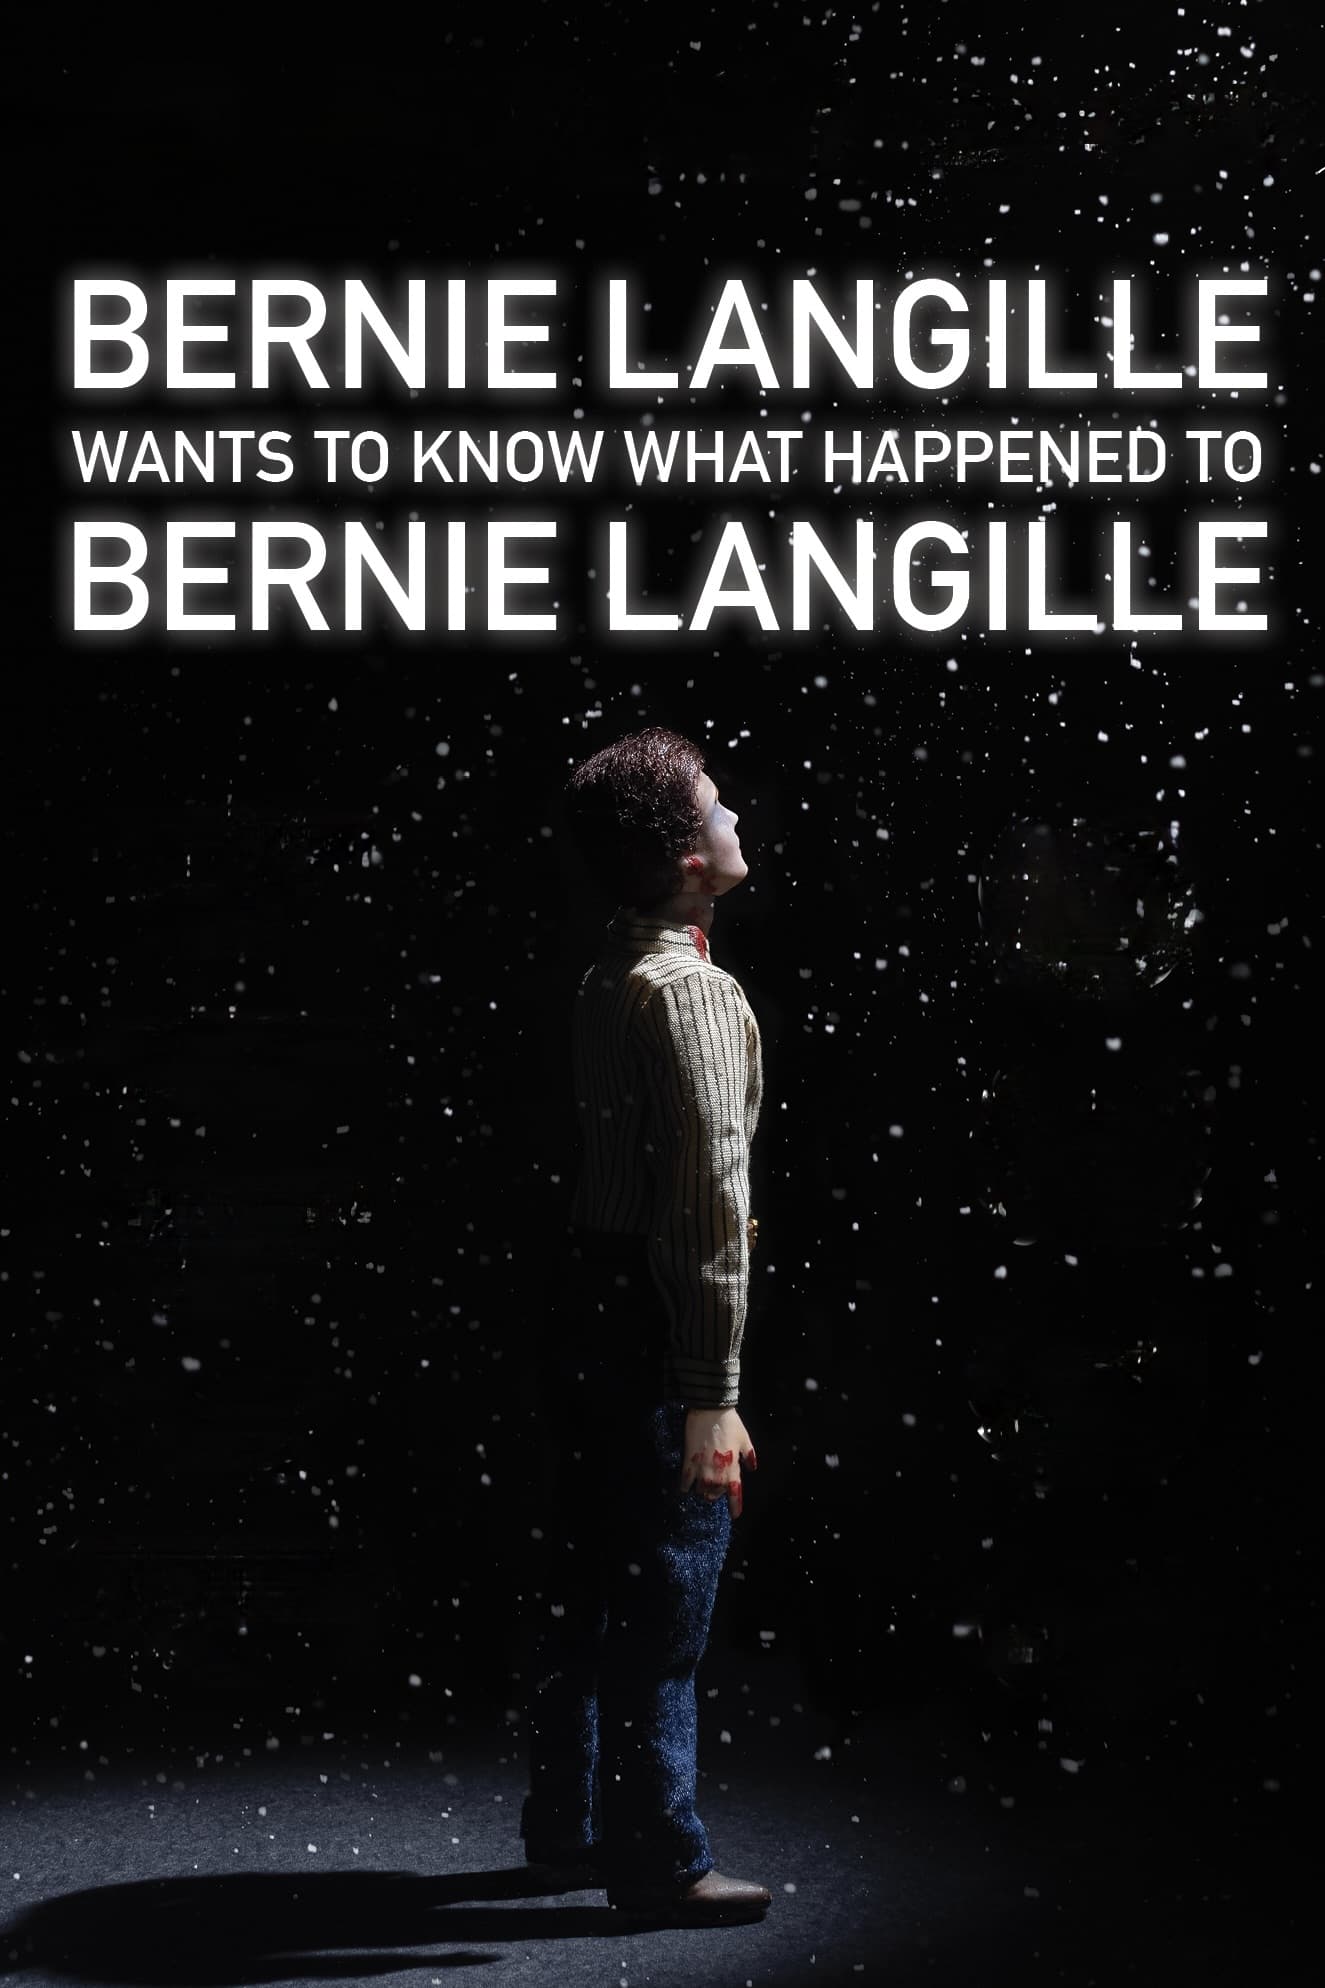 Bernie Langille Wants to Know What Happened to Bernie Langille